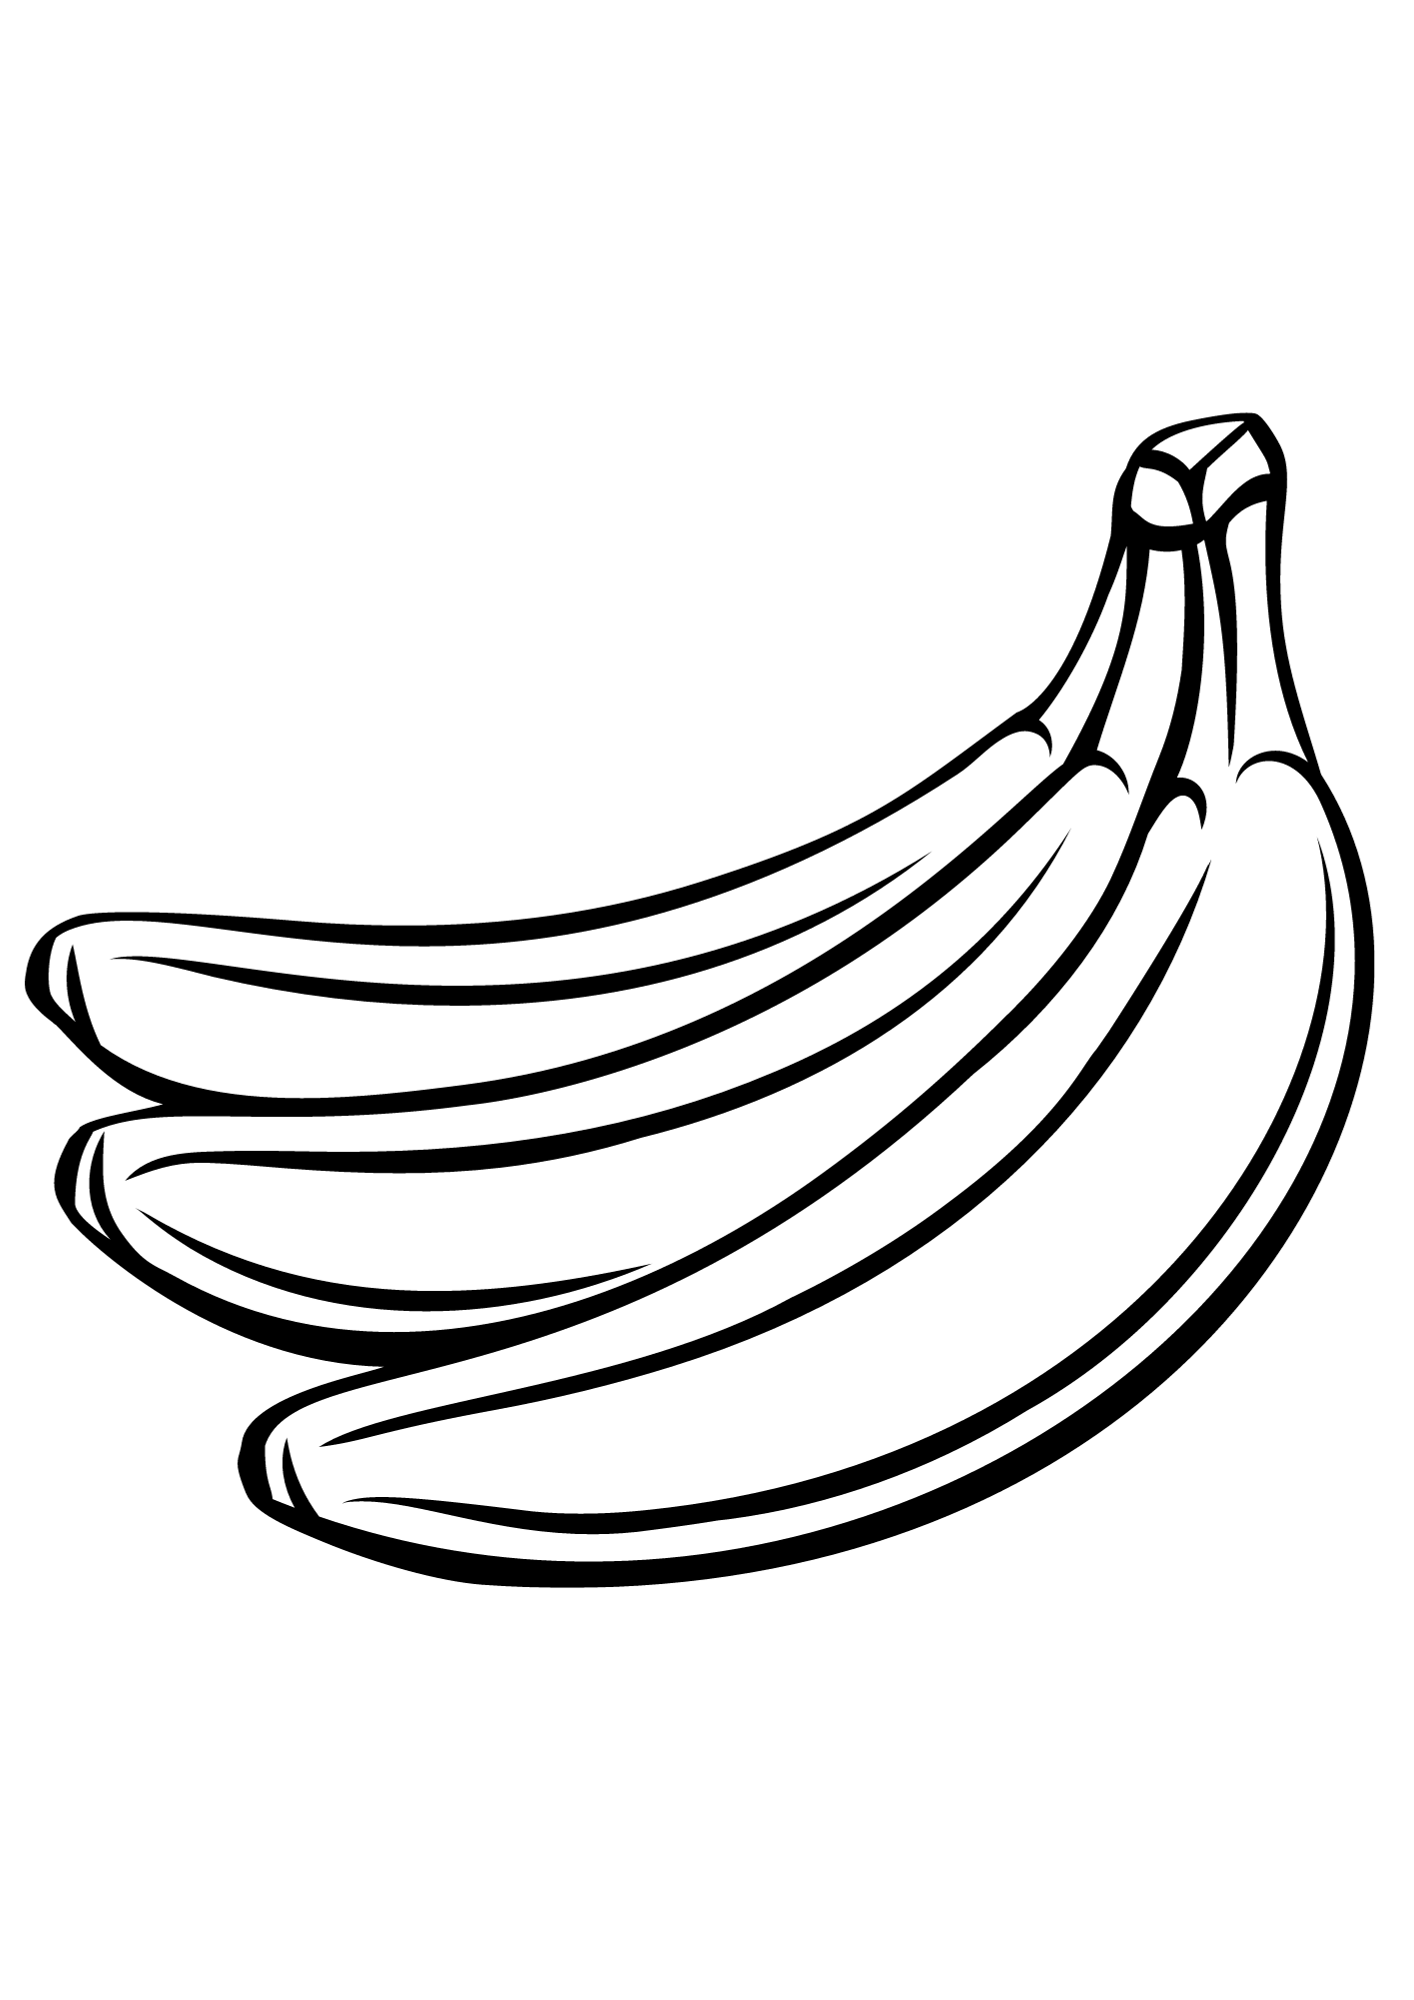 Bananas Free Coloring Pages